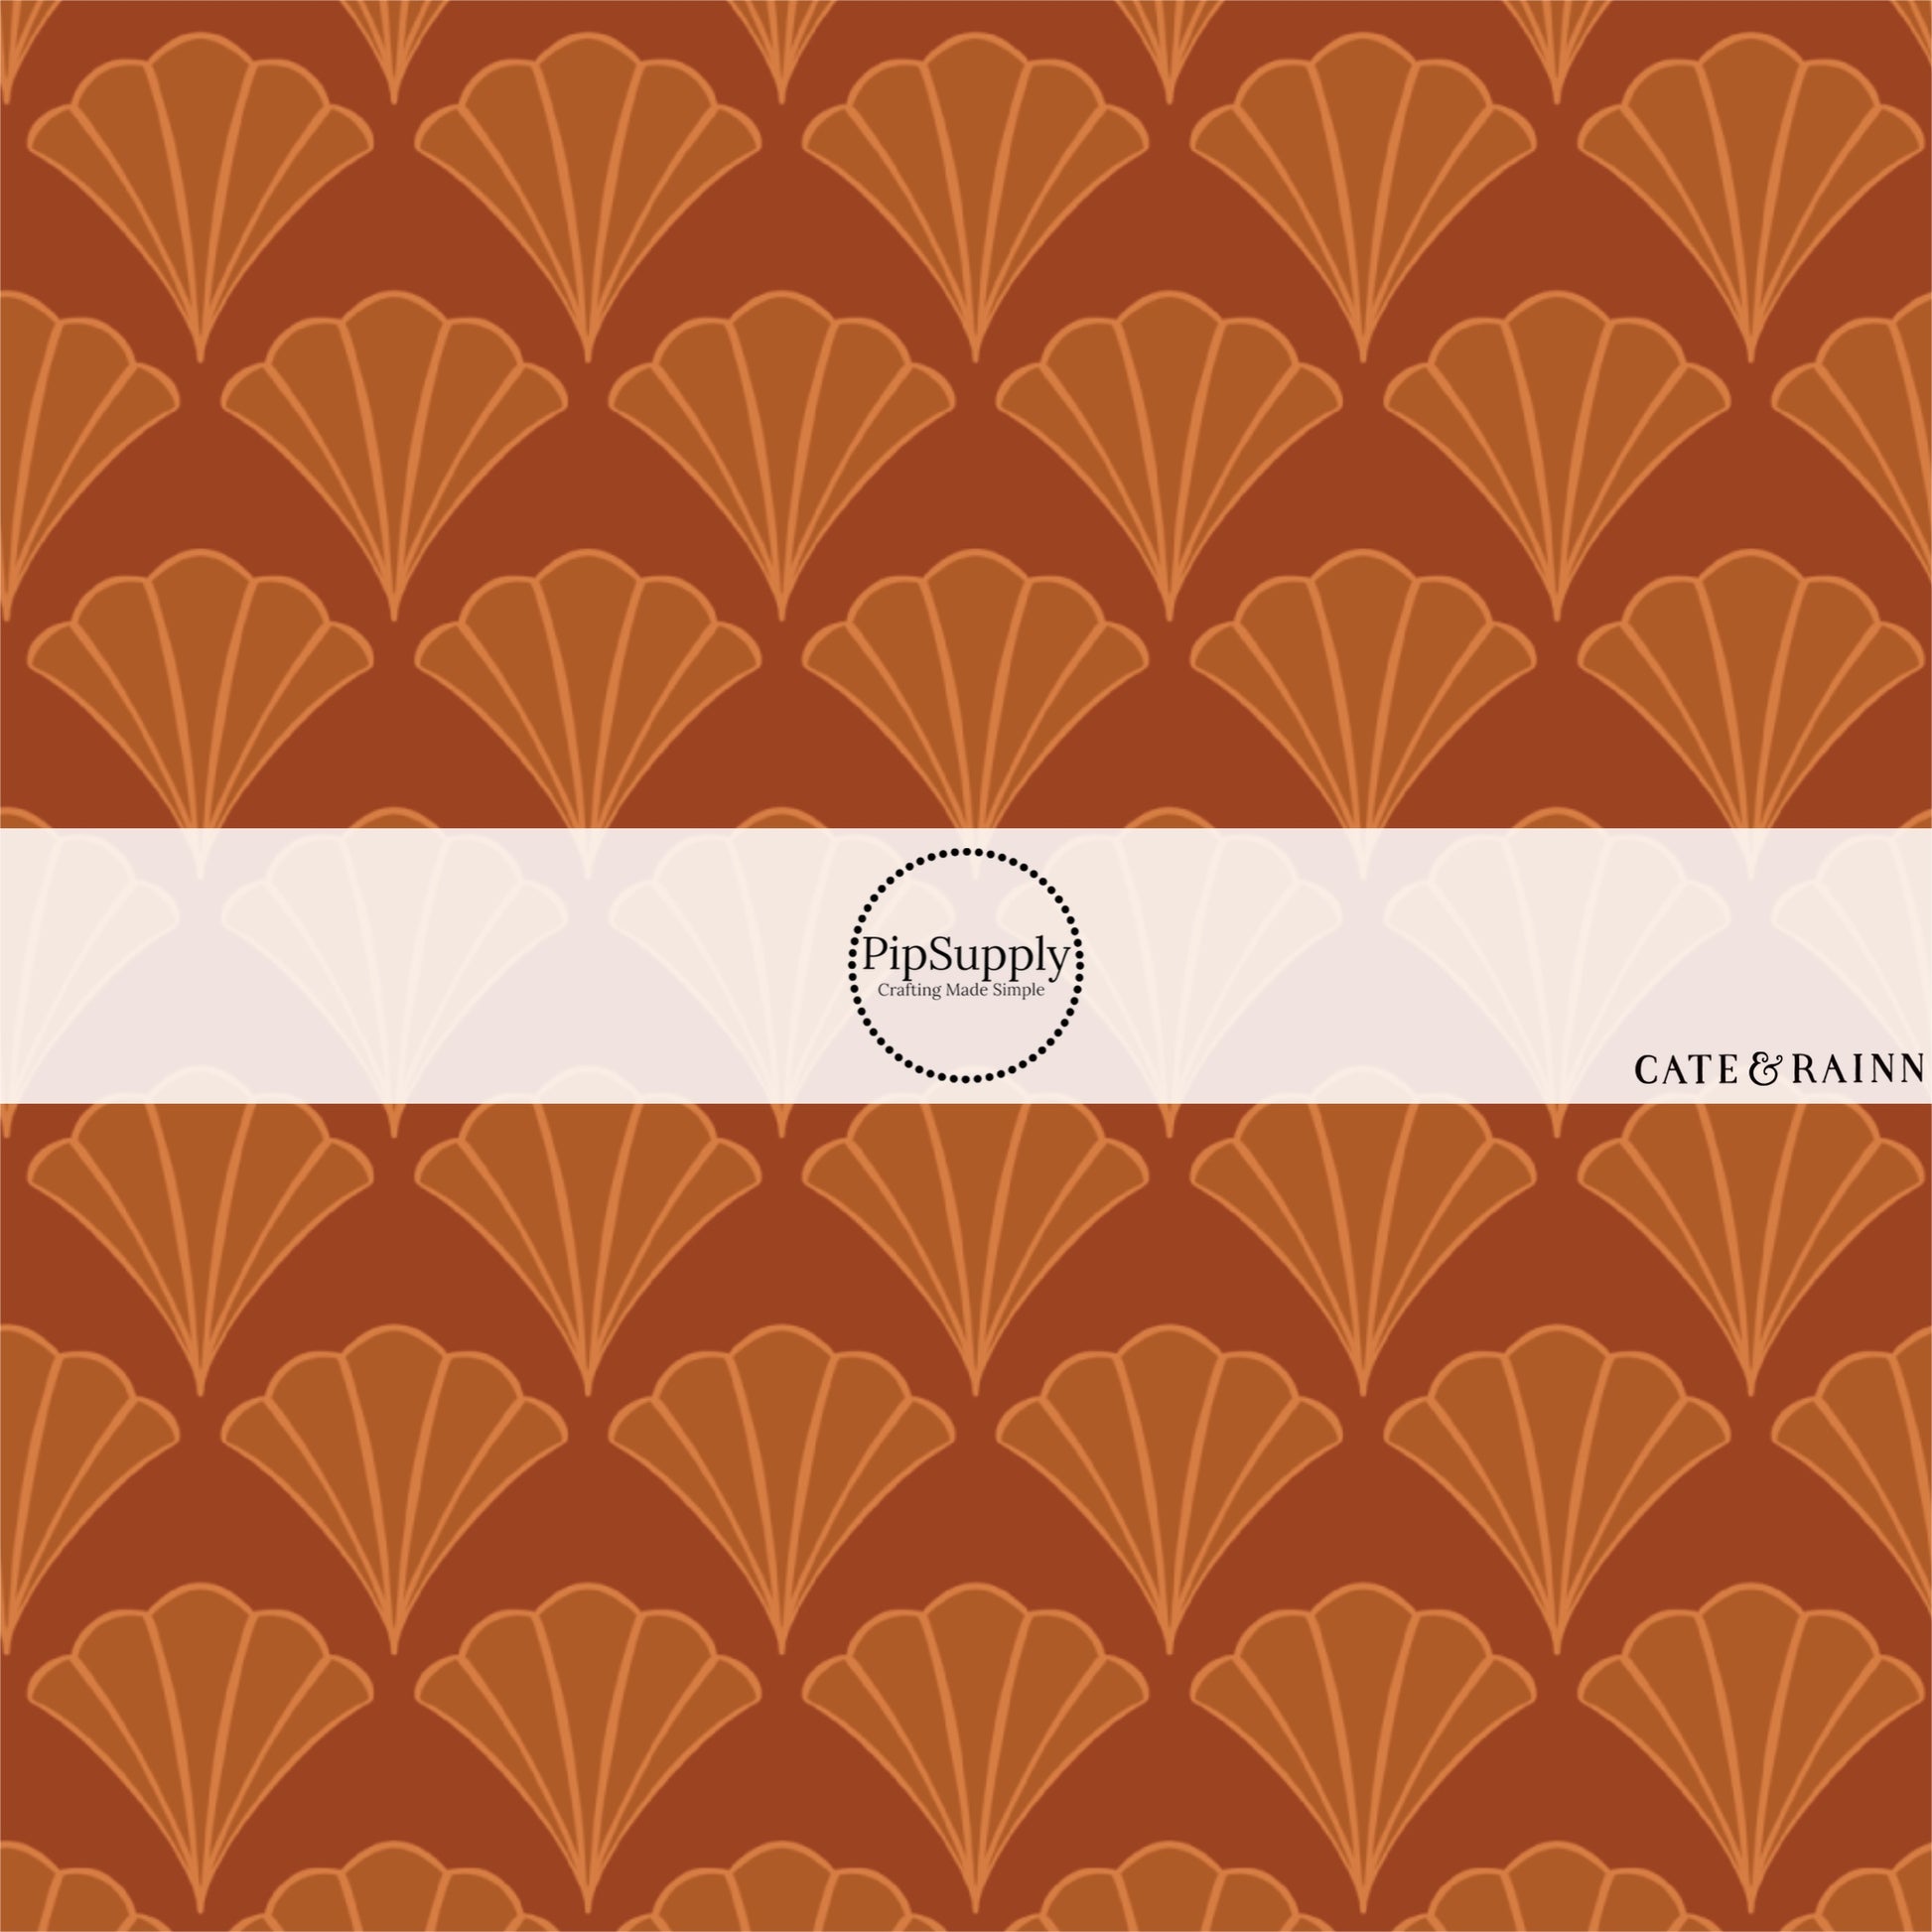 These jungle pattern faux leather sheets contain the following design elements: tropical art deco patterns. Our CPSIA compliant faux leather sheets or rolls can be used for all types of crafting projects.